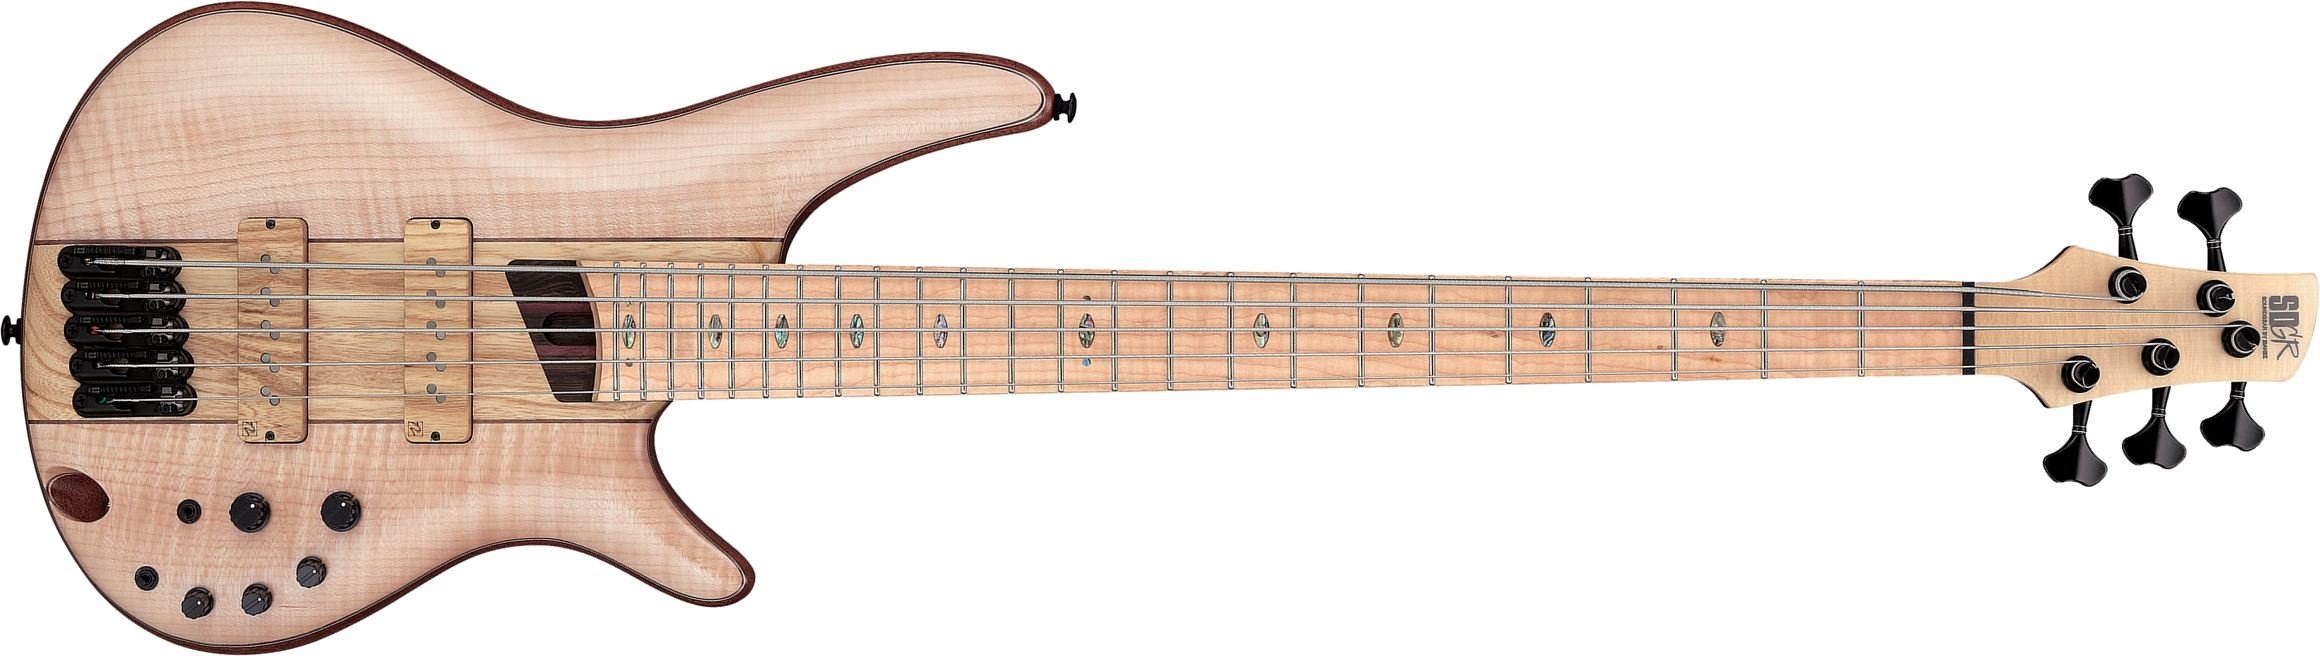 Ibanez Sr5fmdx Ntl Premium 5c Active Mn - Natural Low Gloss - Solid body electric bass - Main picture